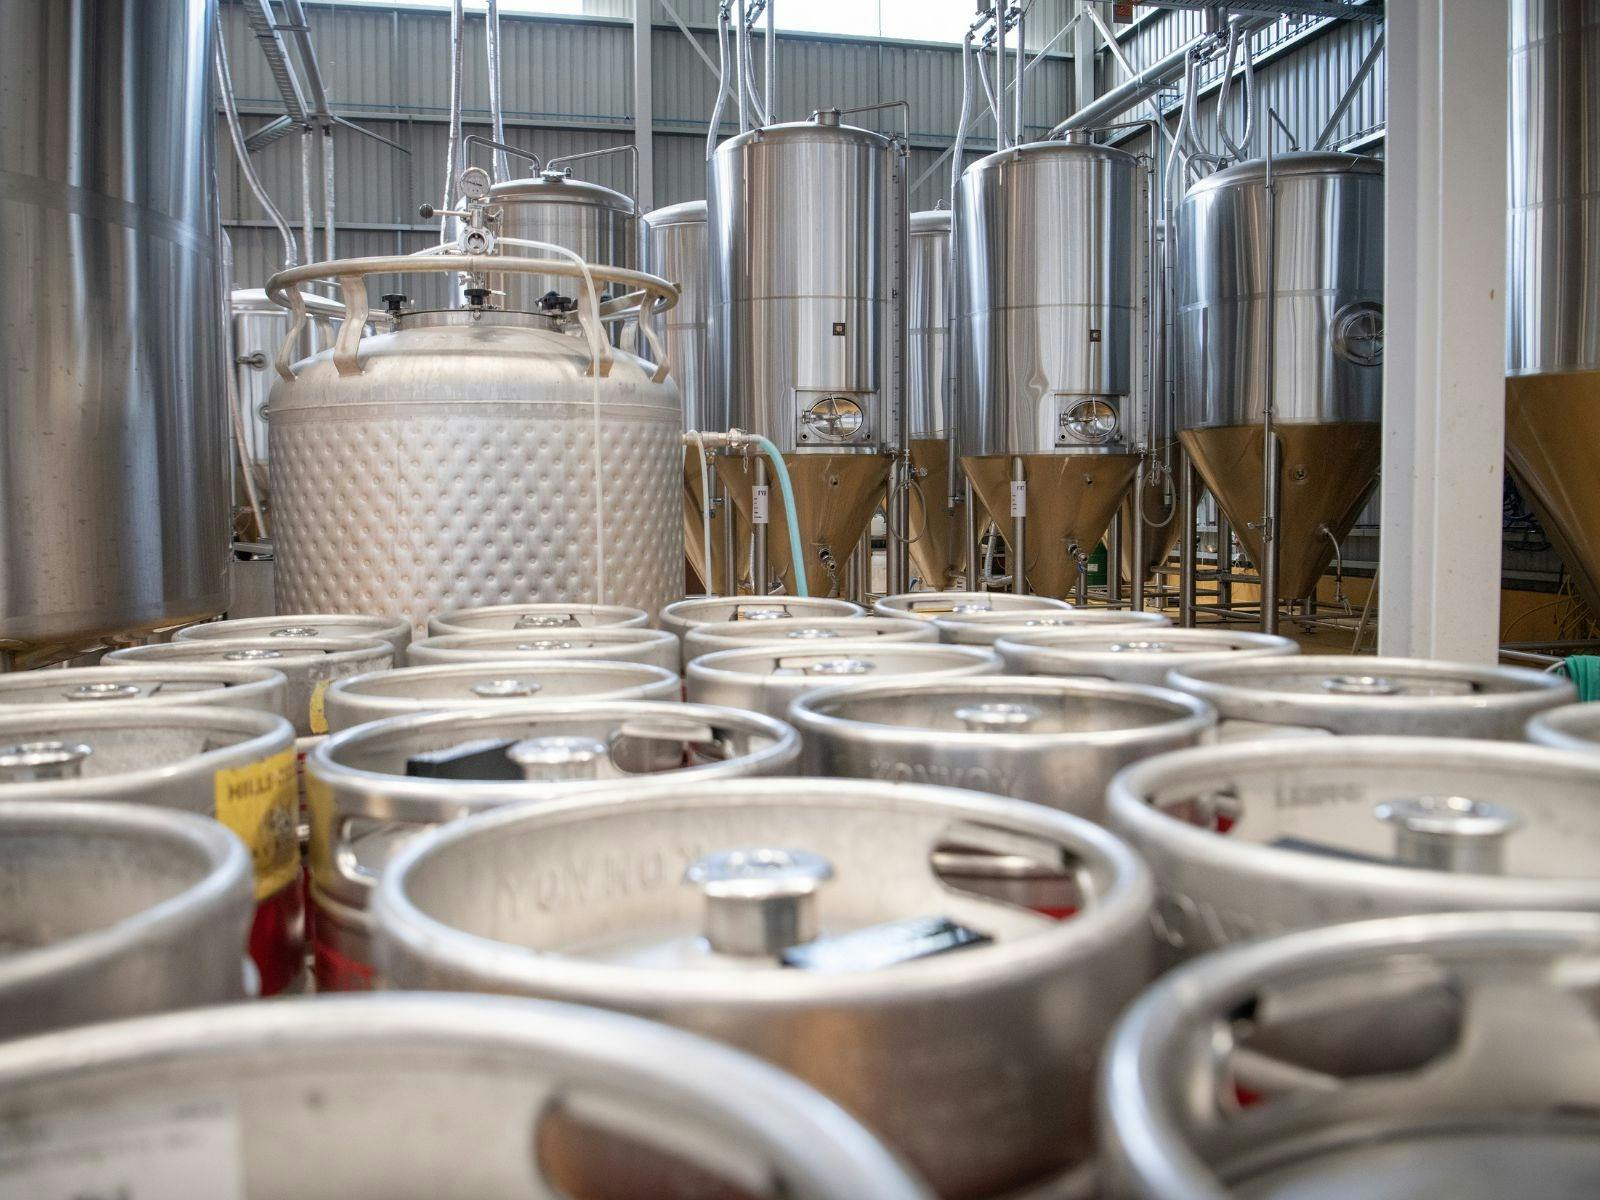 Go behind the scenes at our Guided Brewery Tours